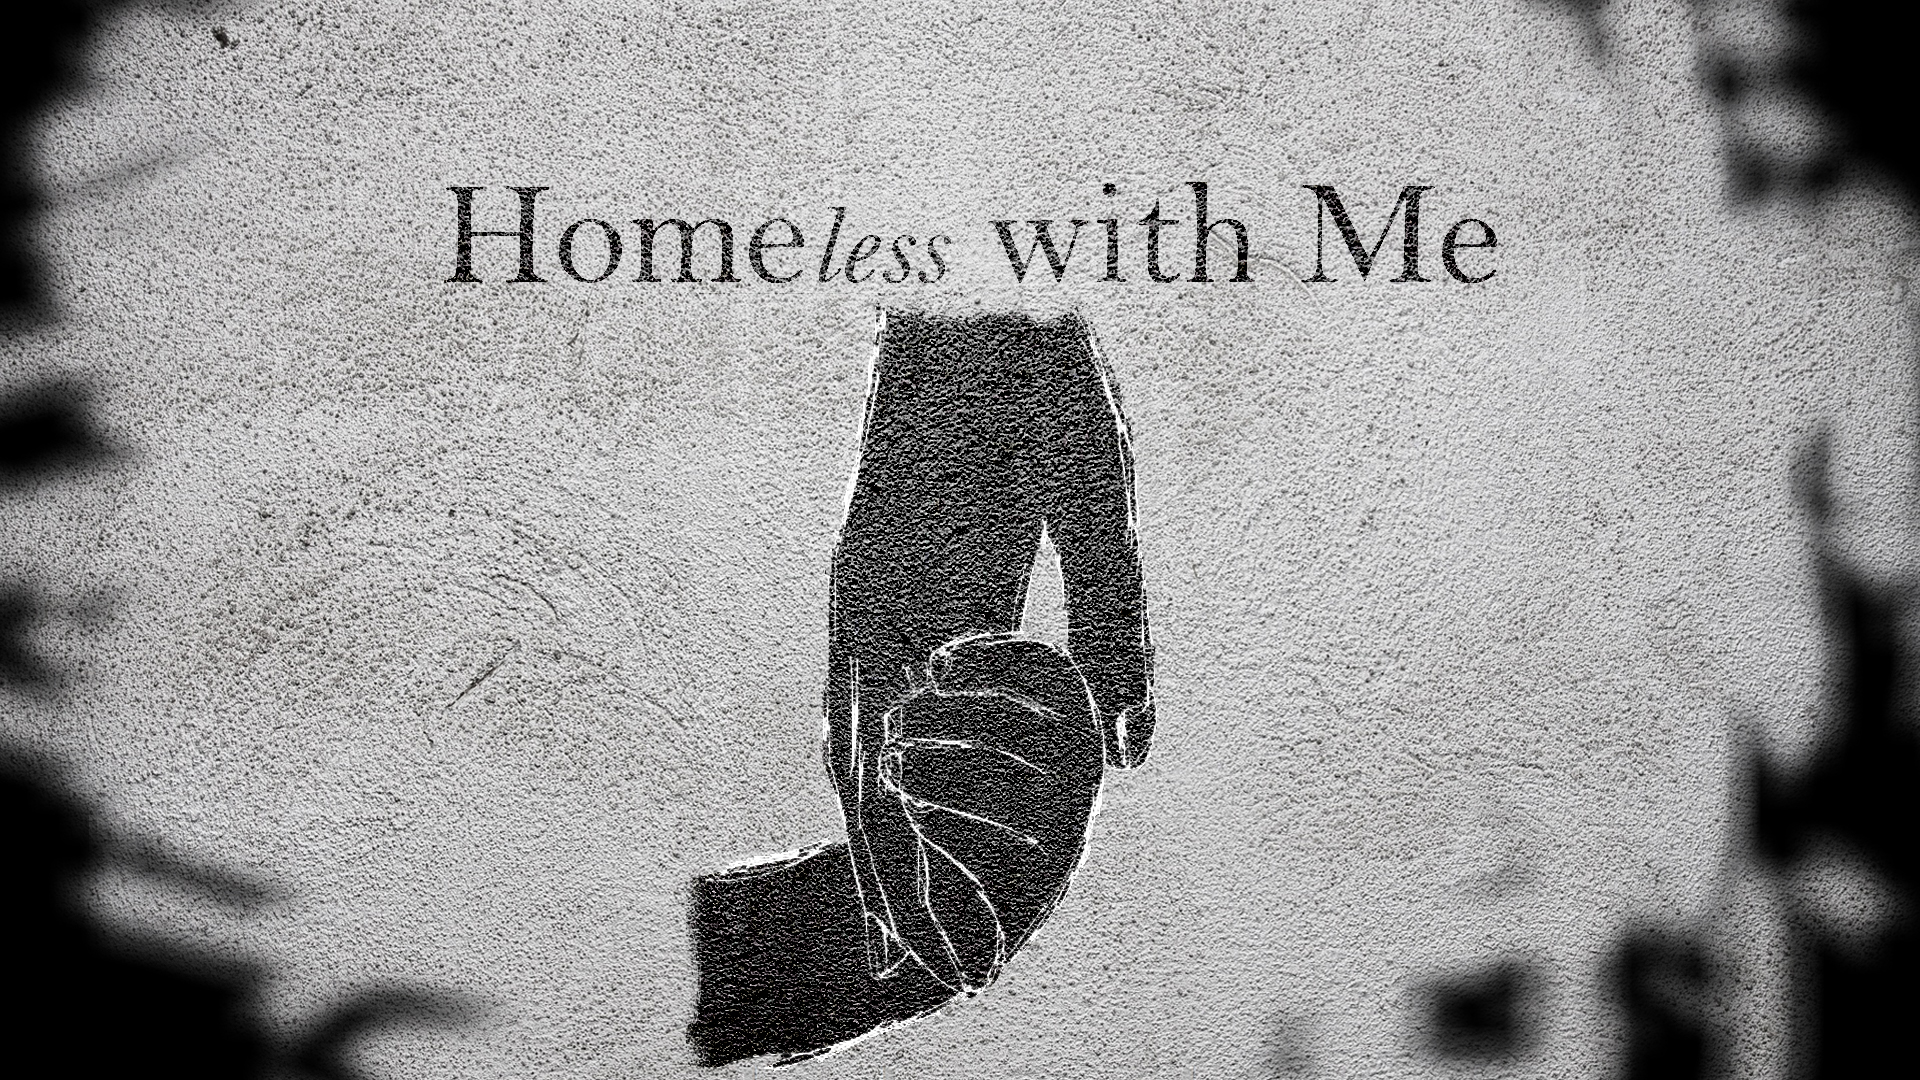 HomeLess with Me